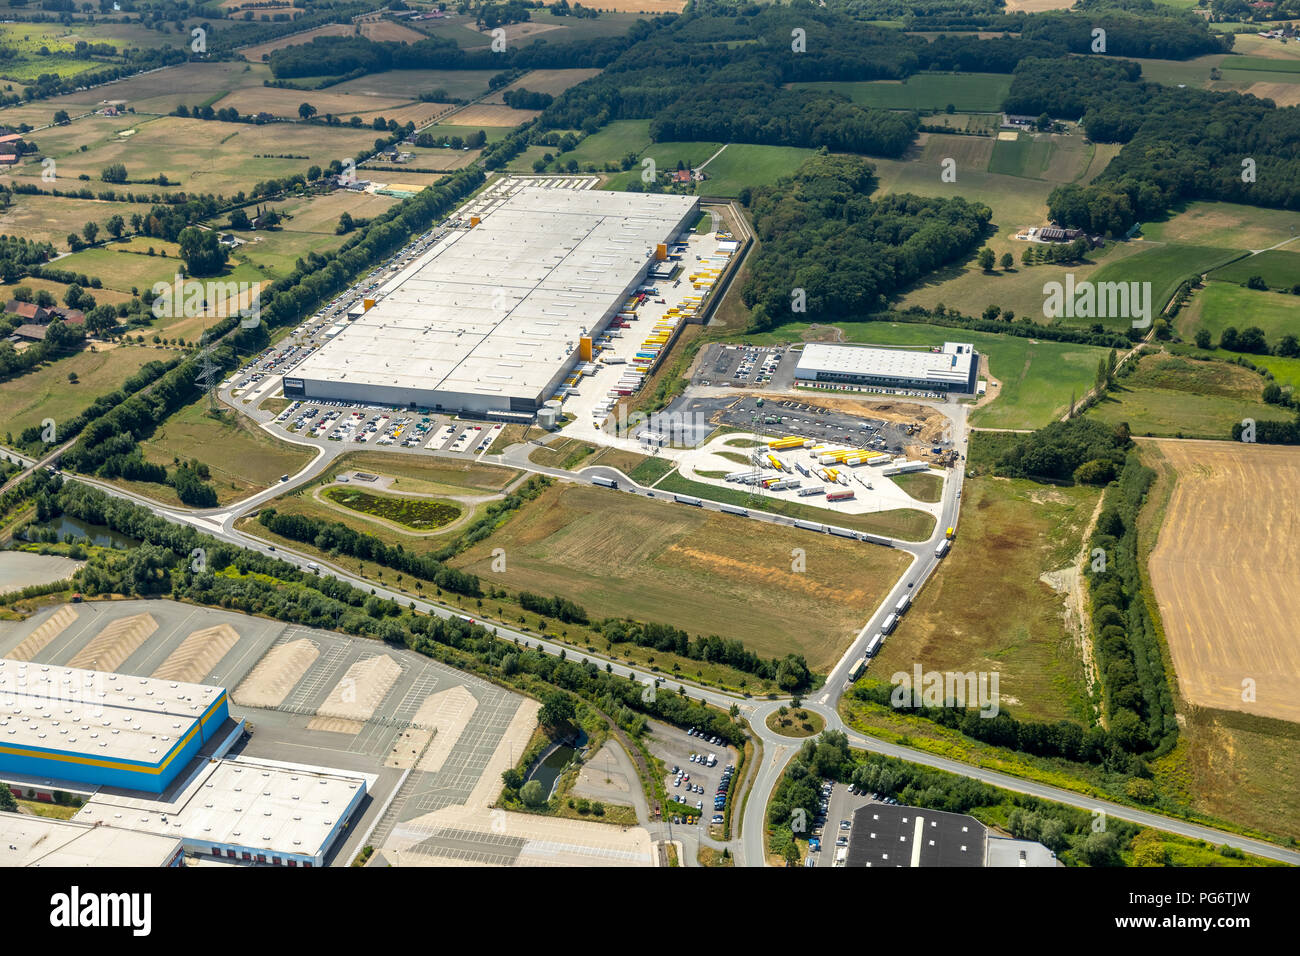 Amazon Logistics Werne GmbH - DTM1, indoor construction site at the Amazon,  Thermo Sensor GmbH, truck parking, Werne, Ruhr area, North Rhine-Westphali  Stock Photo - Alamy